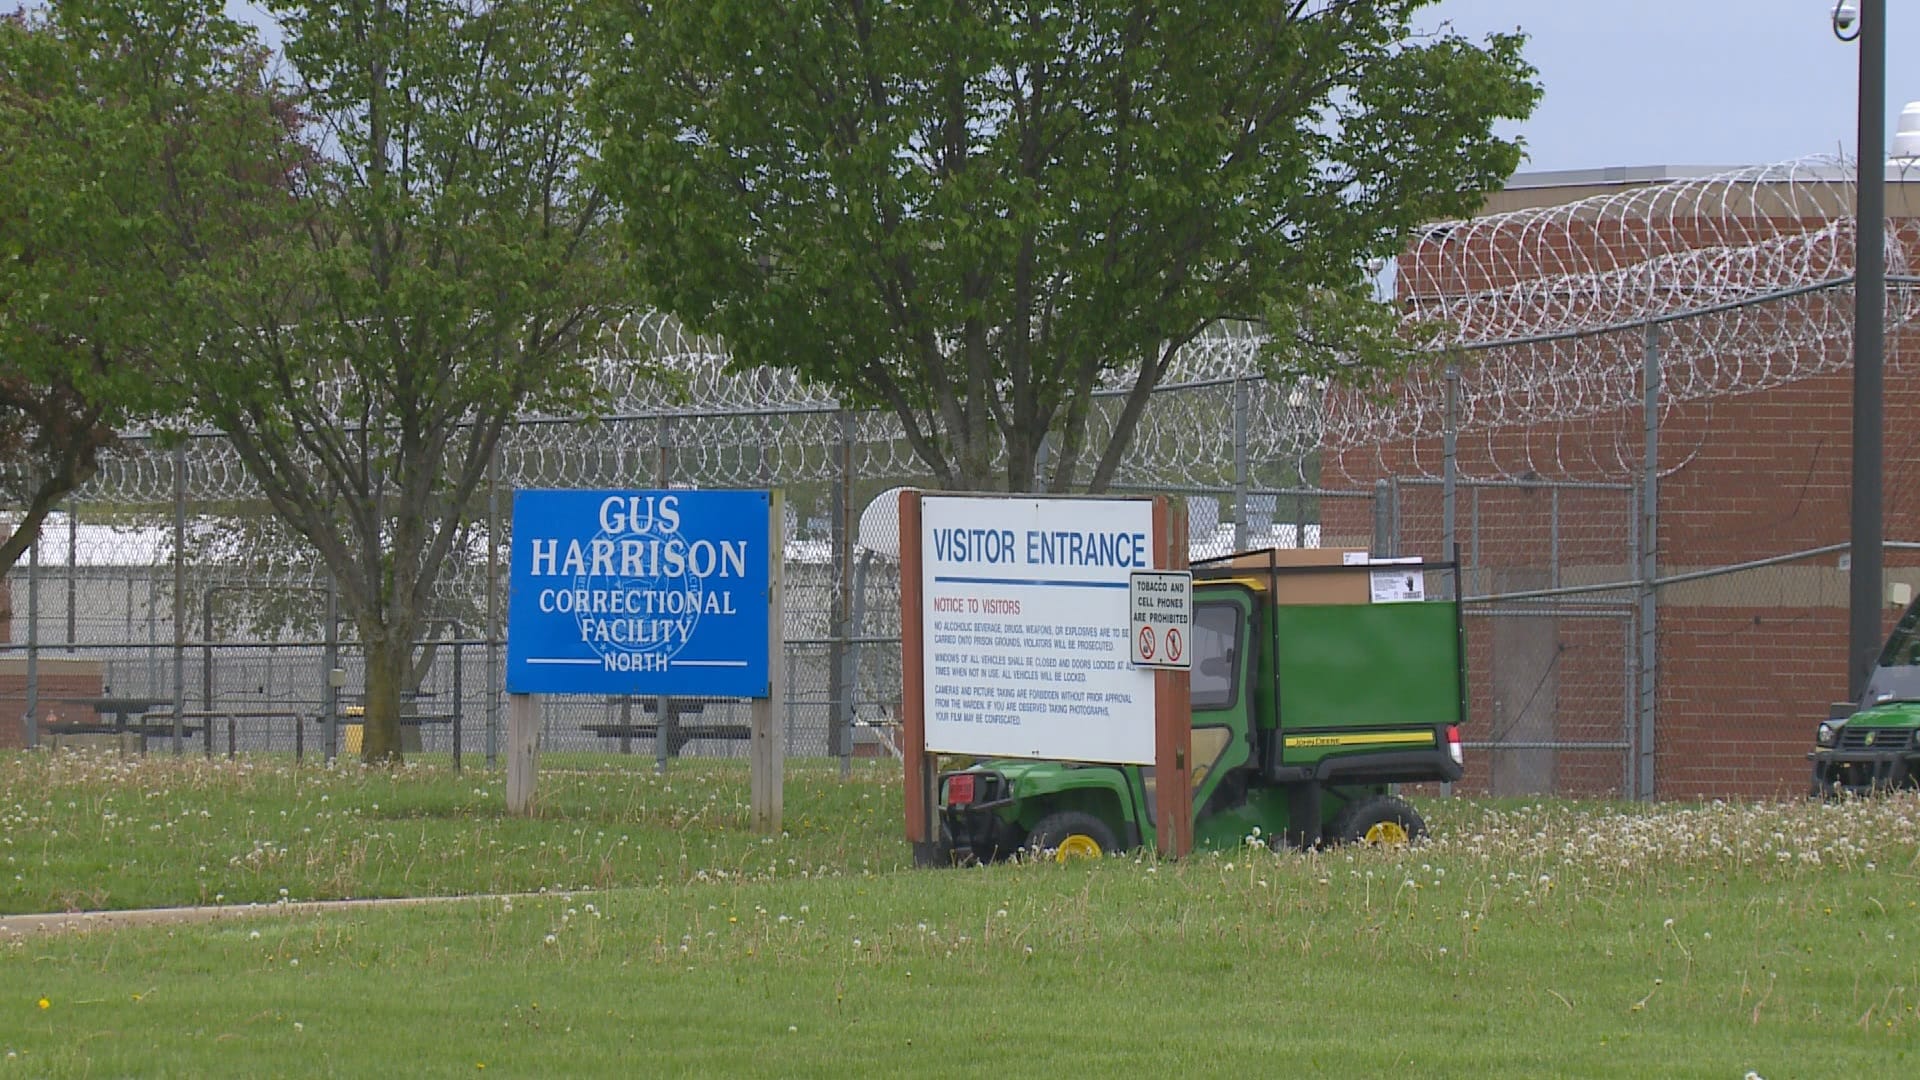 Image of commercial chain link fencing, barbed wire, and security lighting at Gus Harrison Correctional Facility